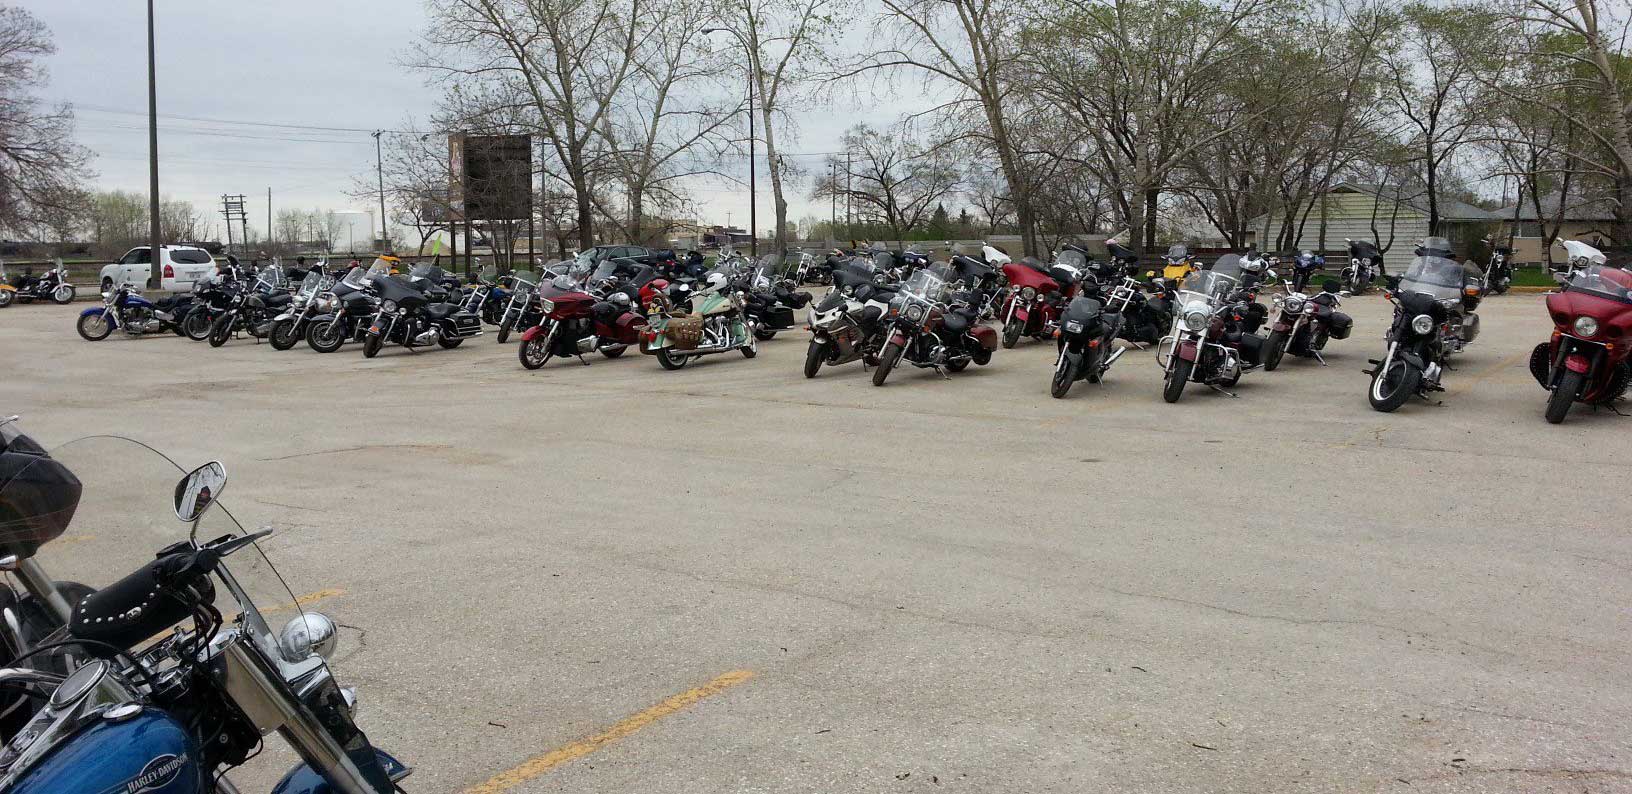 2013 Motorcycle Ride for Dad - Myles O'Reilly